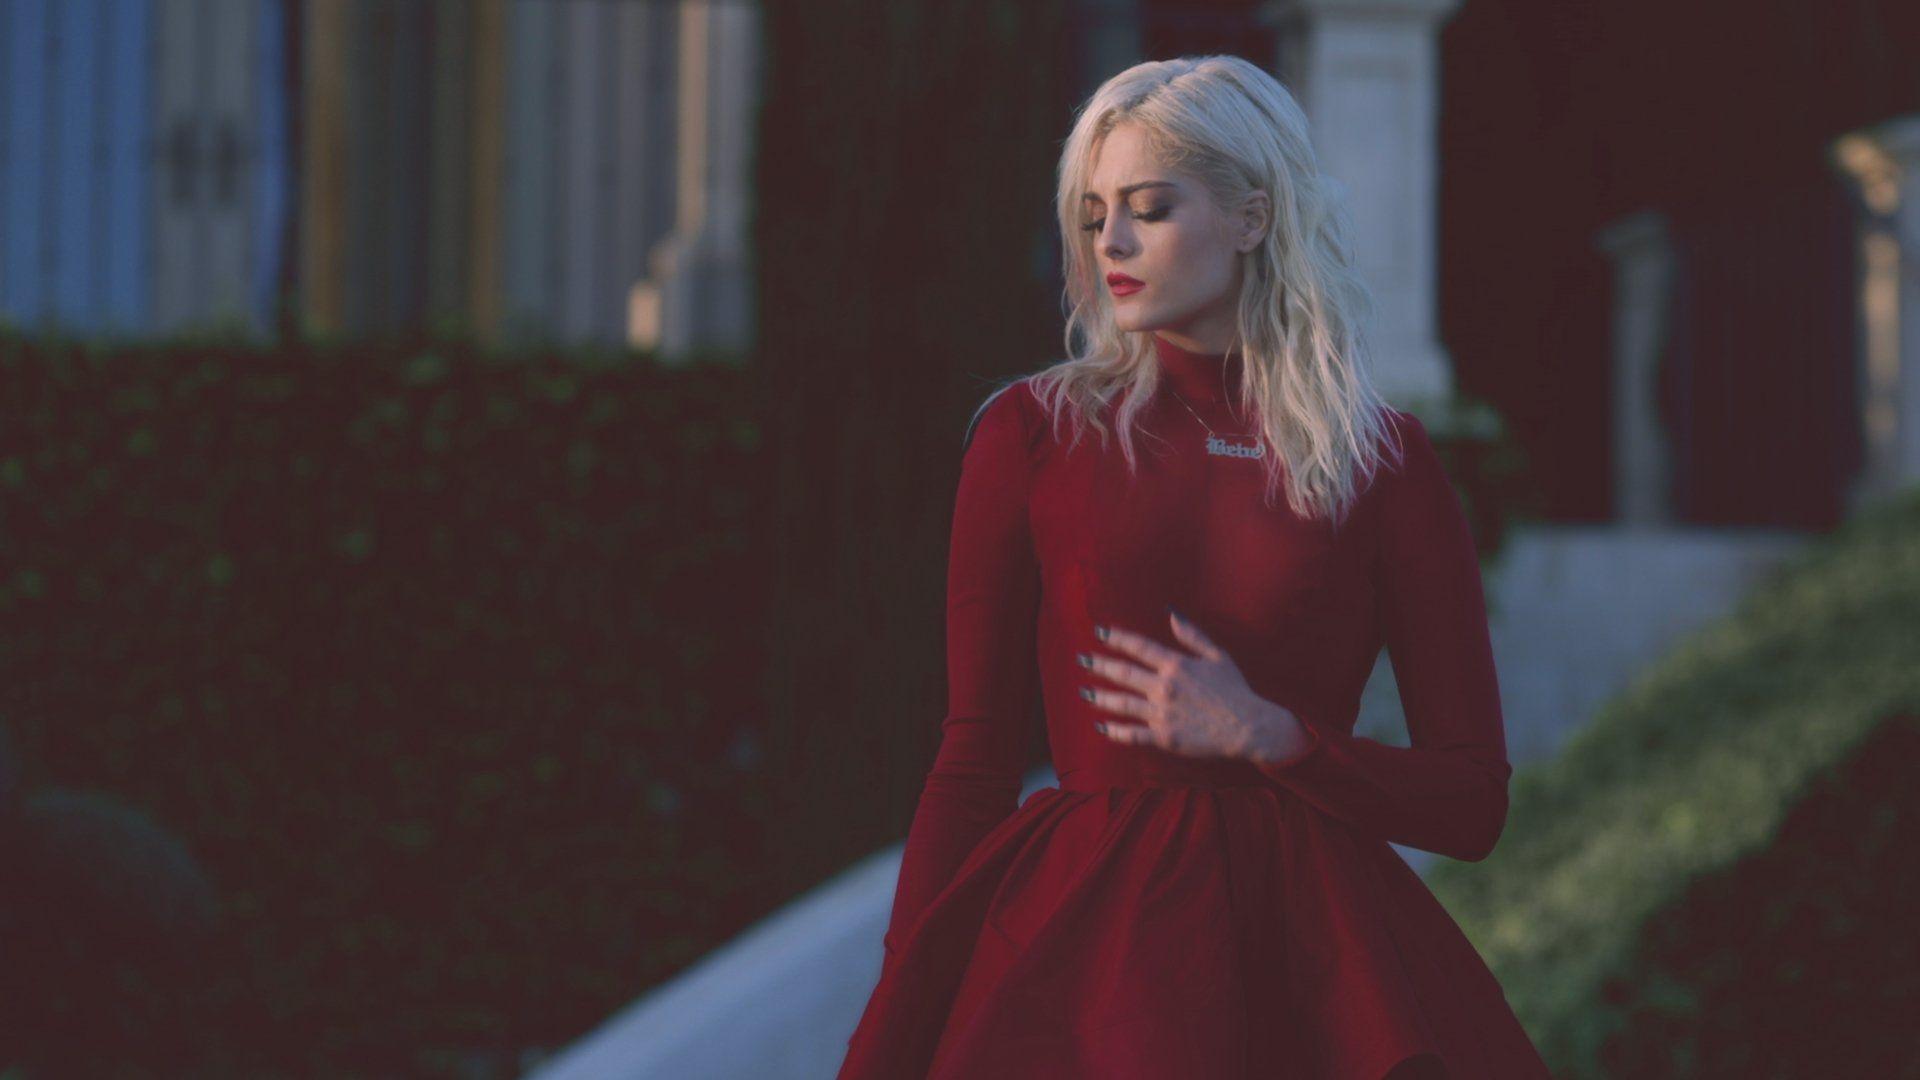 Bebe Rexha Music Videos, Songs, and More